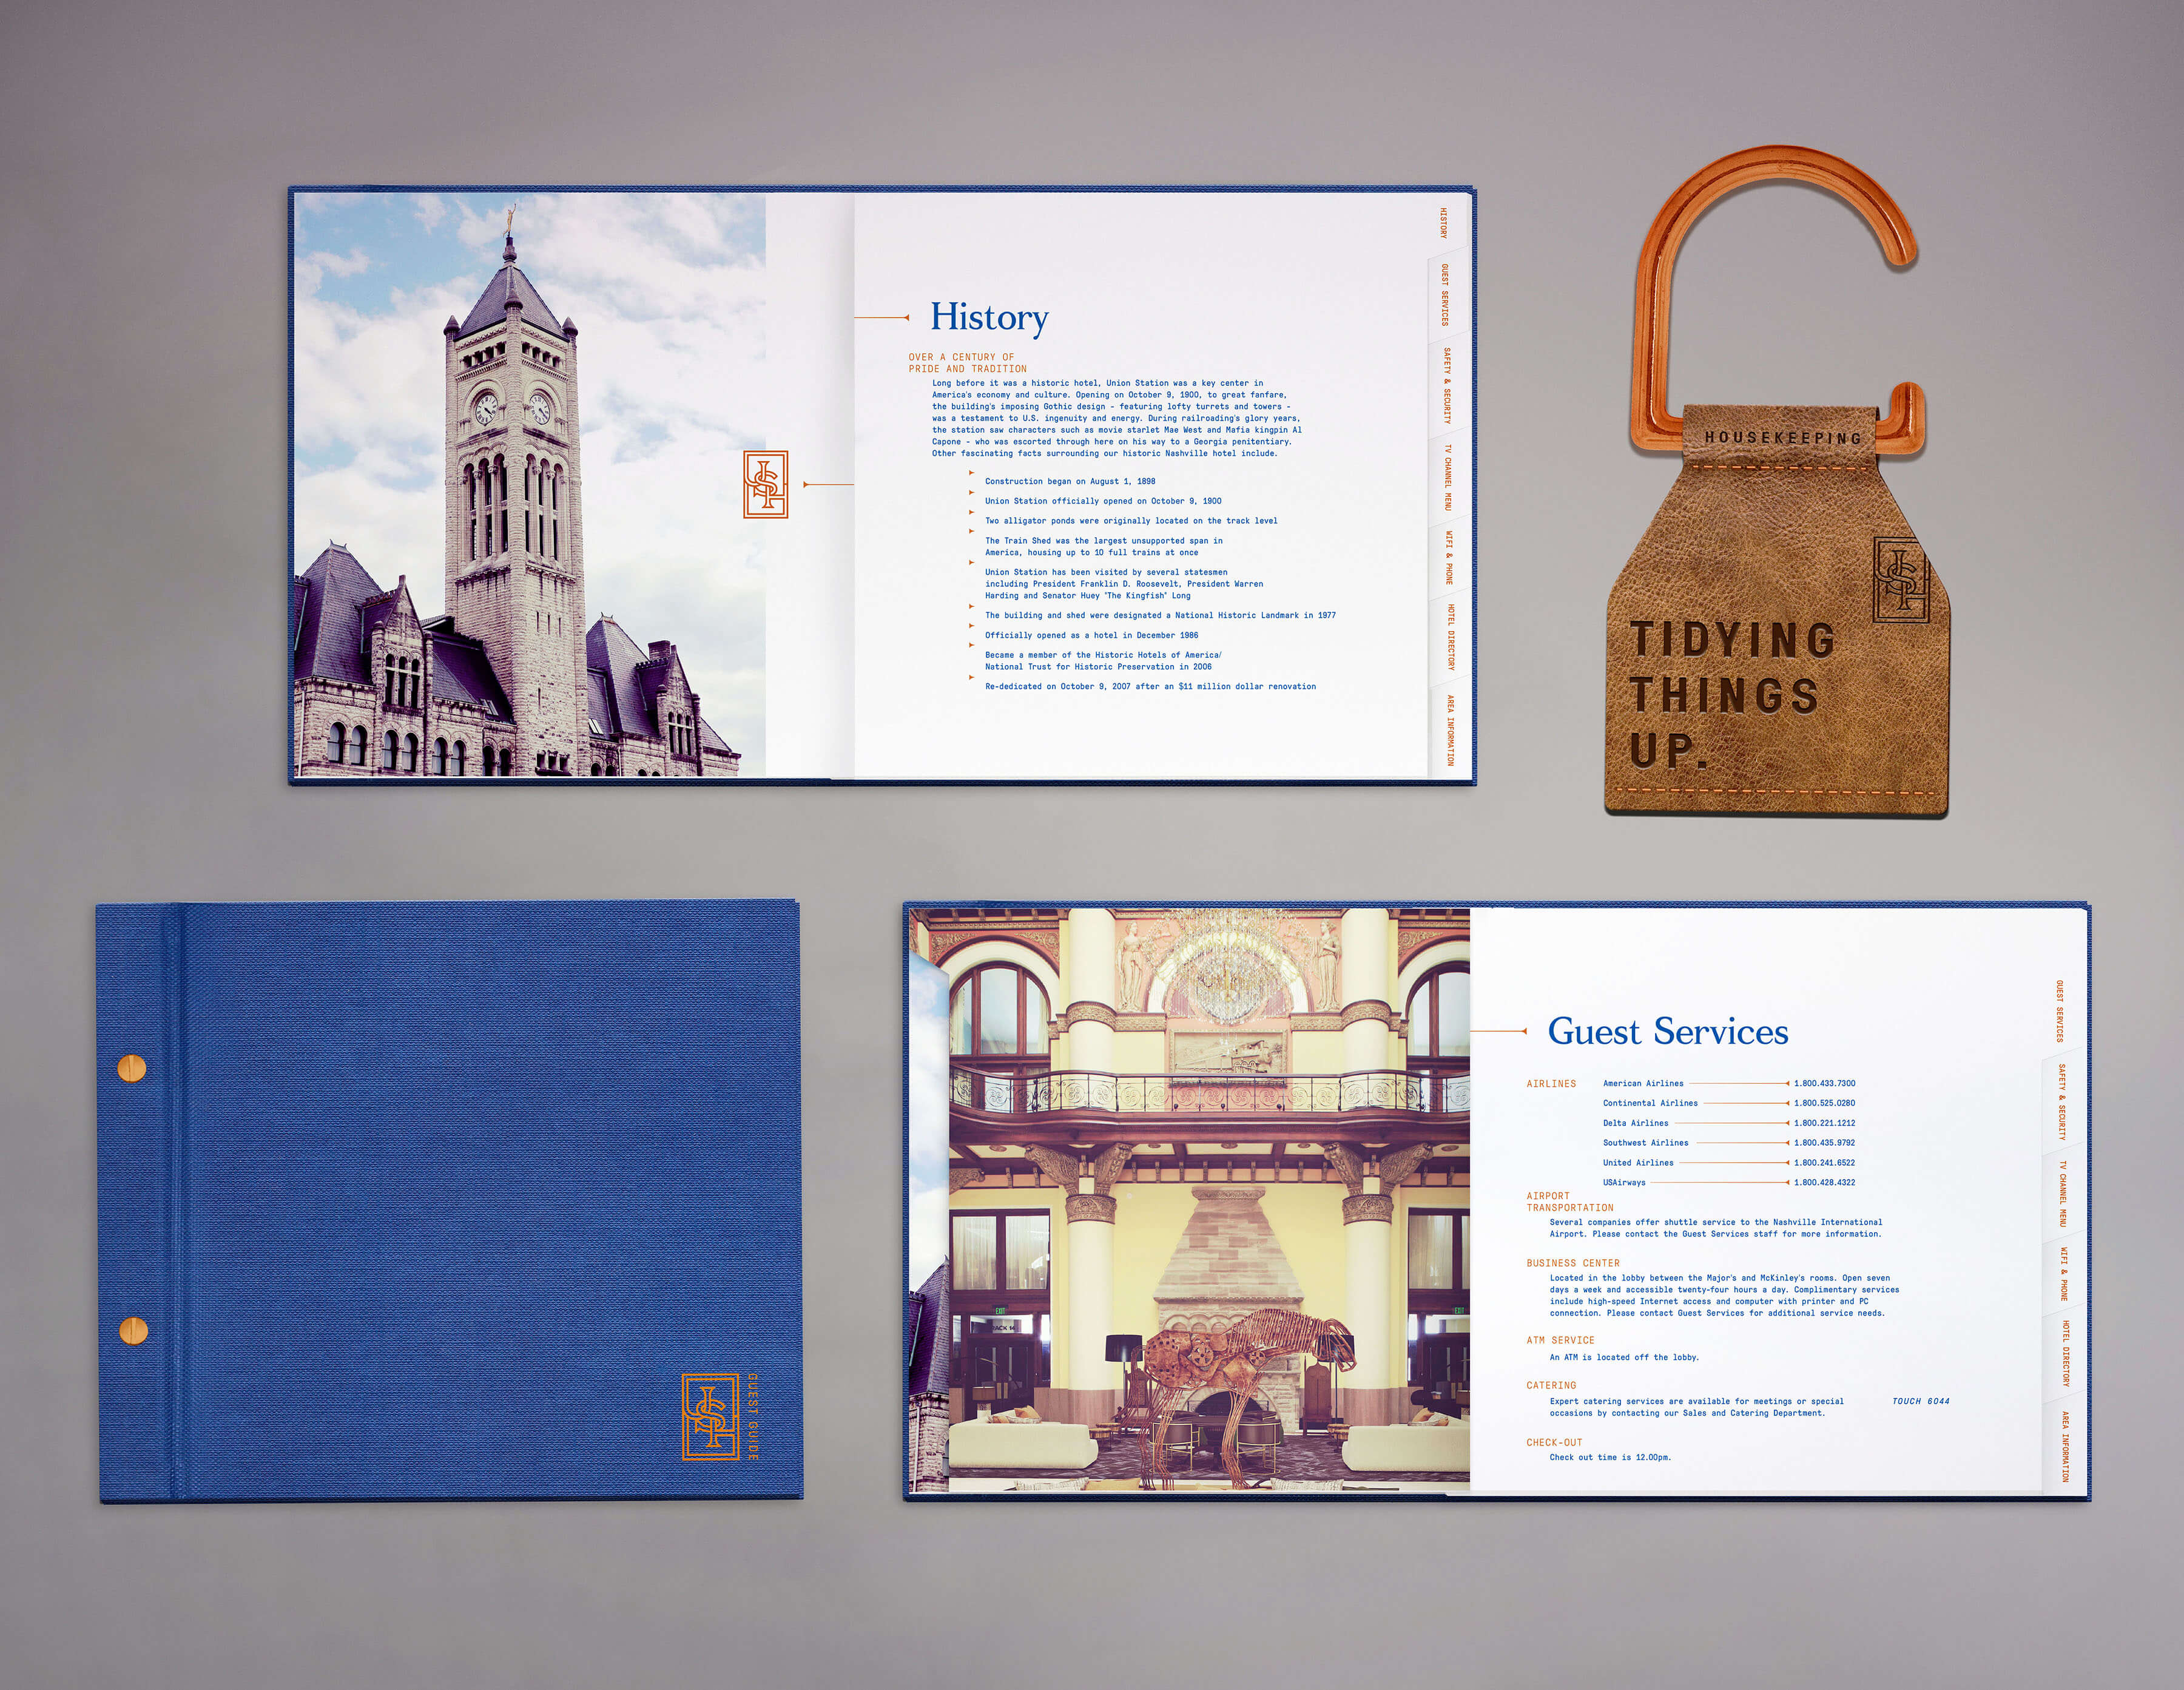 Image of the cover and internal pages for the Union Station Hotel guest guide and attendant tag.